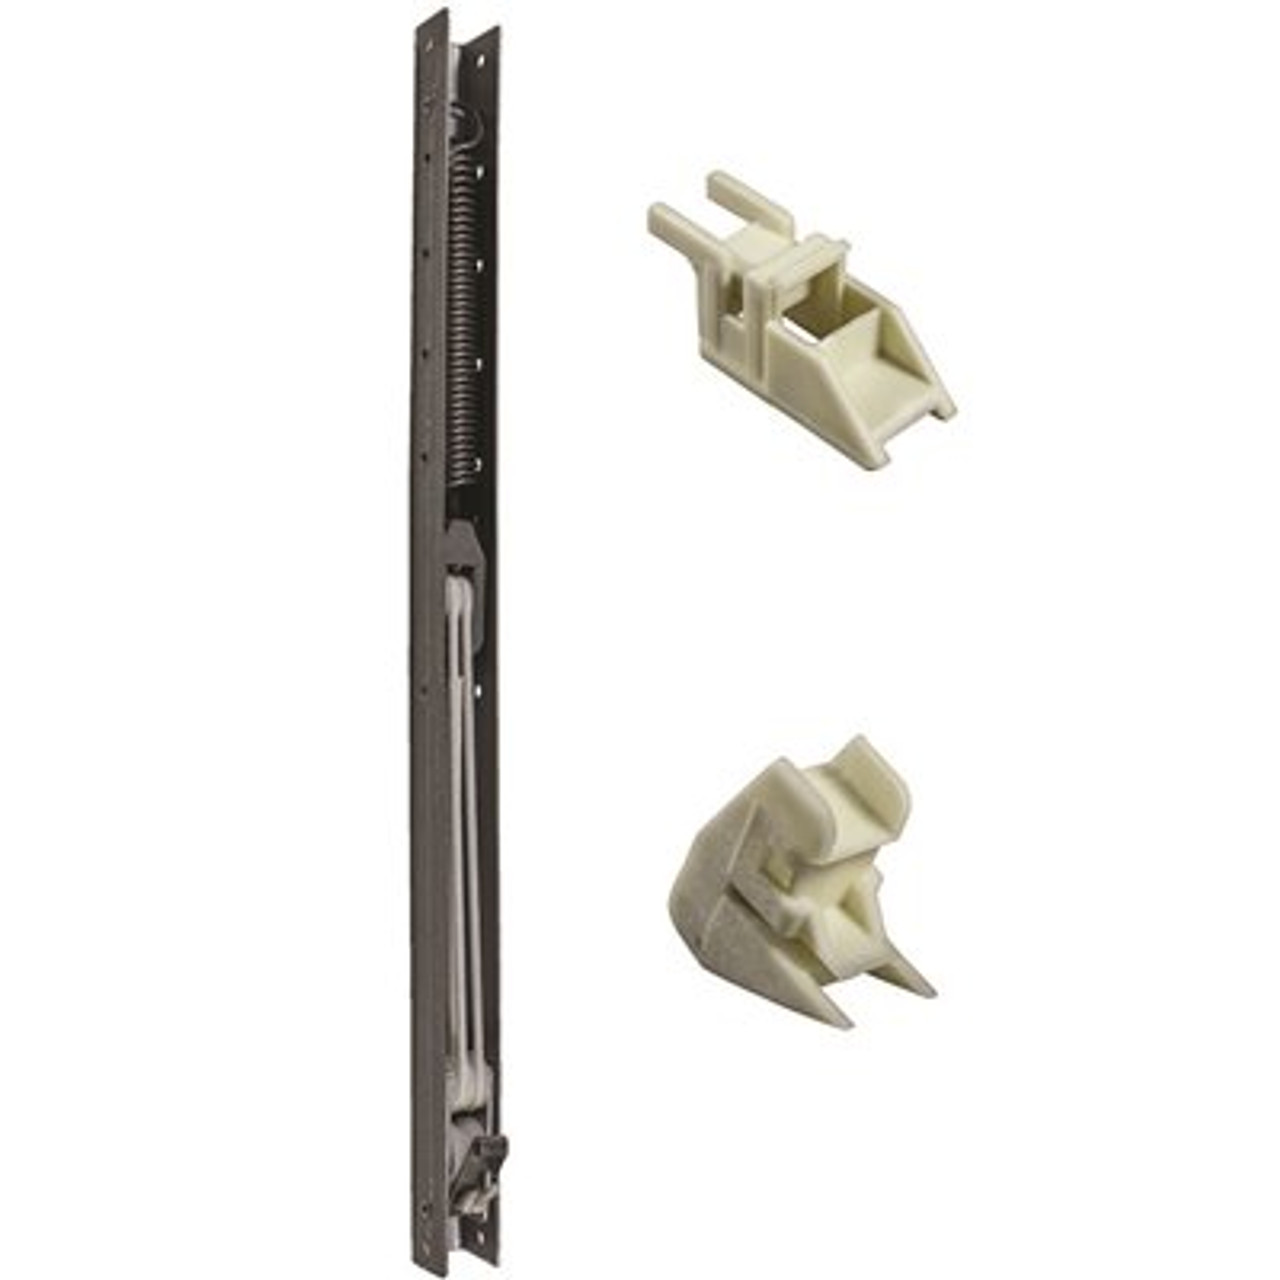 17 In. L Window Channel Balance 1640 With 9/16 In. W X 5/8 In. D Top And Bottom End Brackets Attached - 314413205